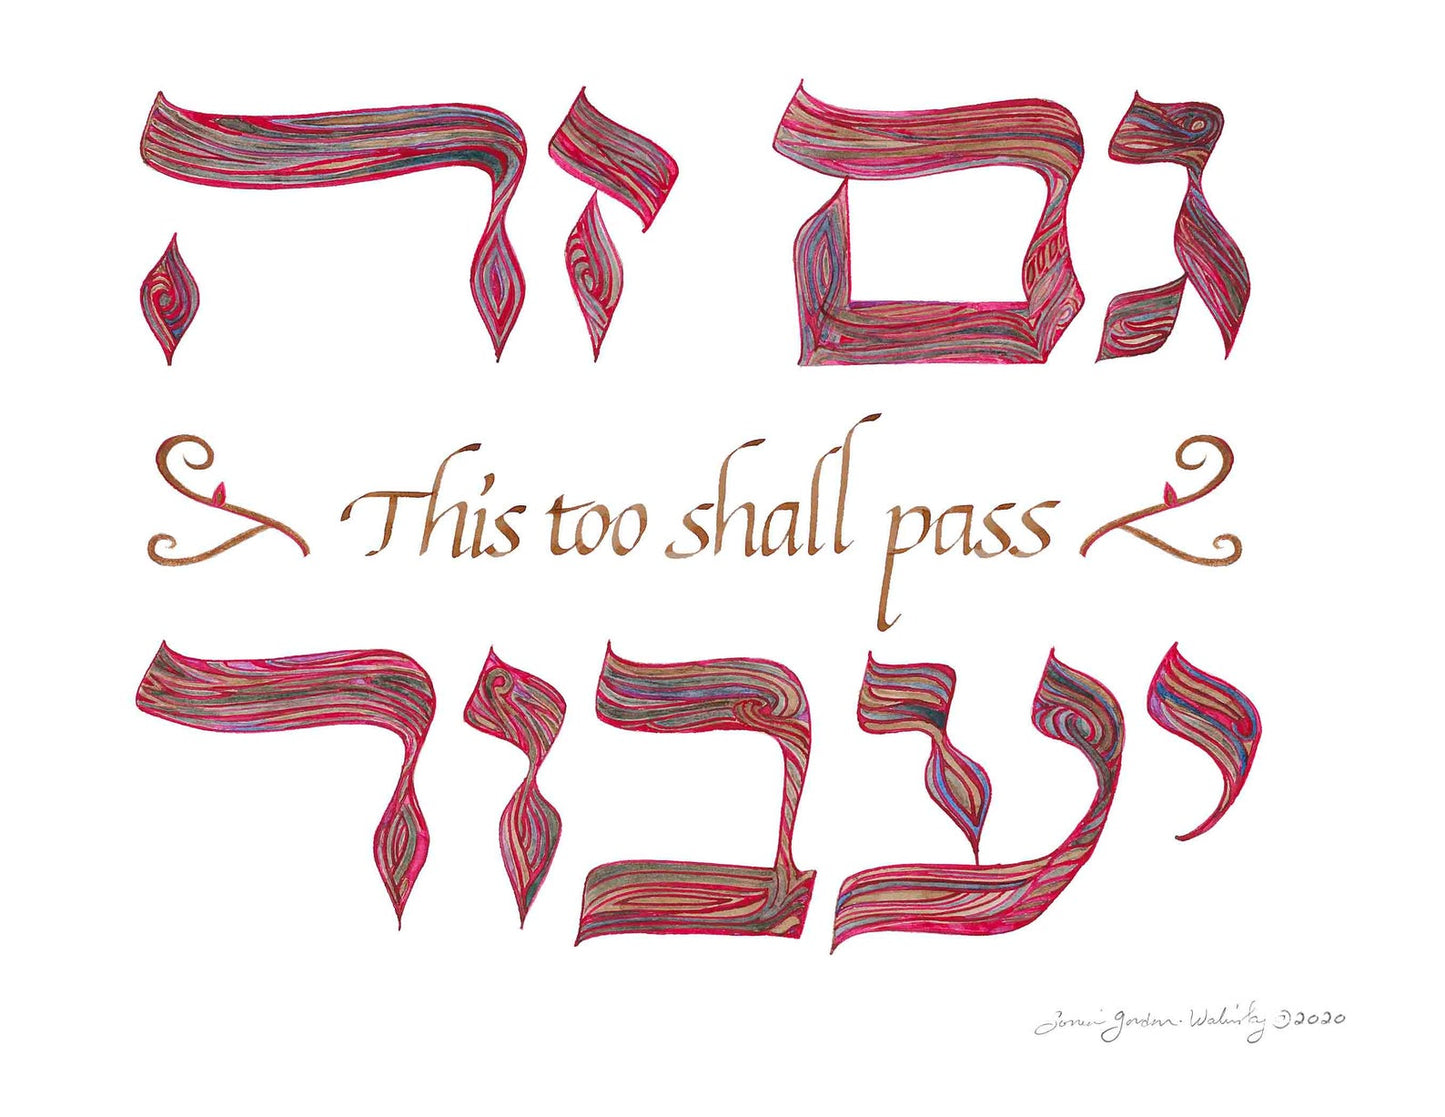 This Too Shall Pass: Handmade Hebrew and English Calligraphy